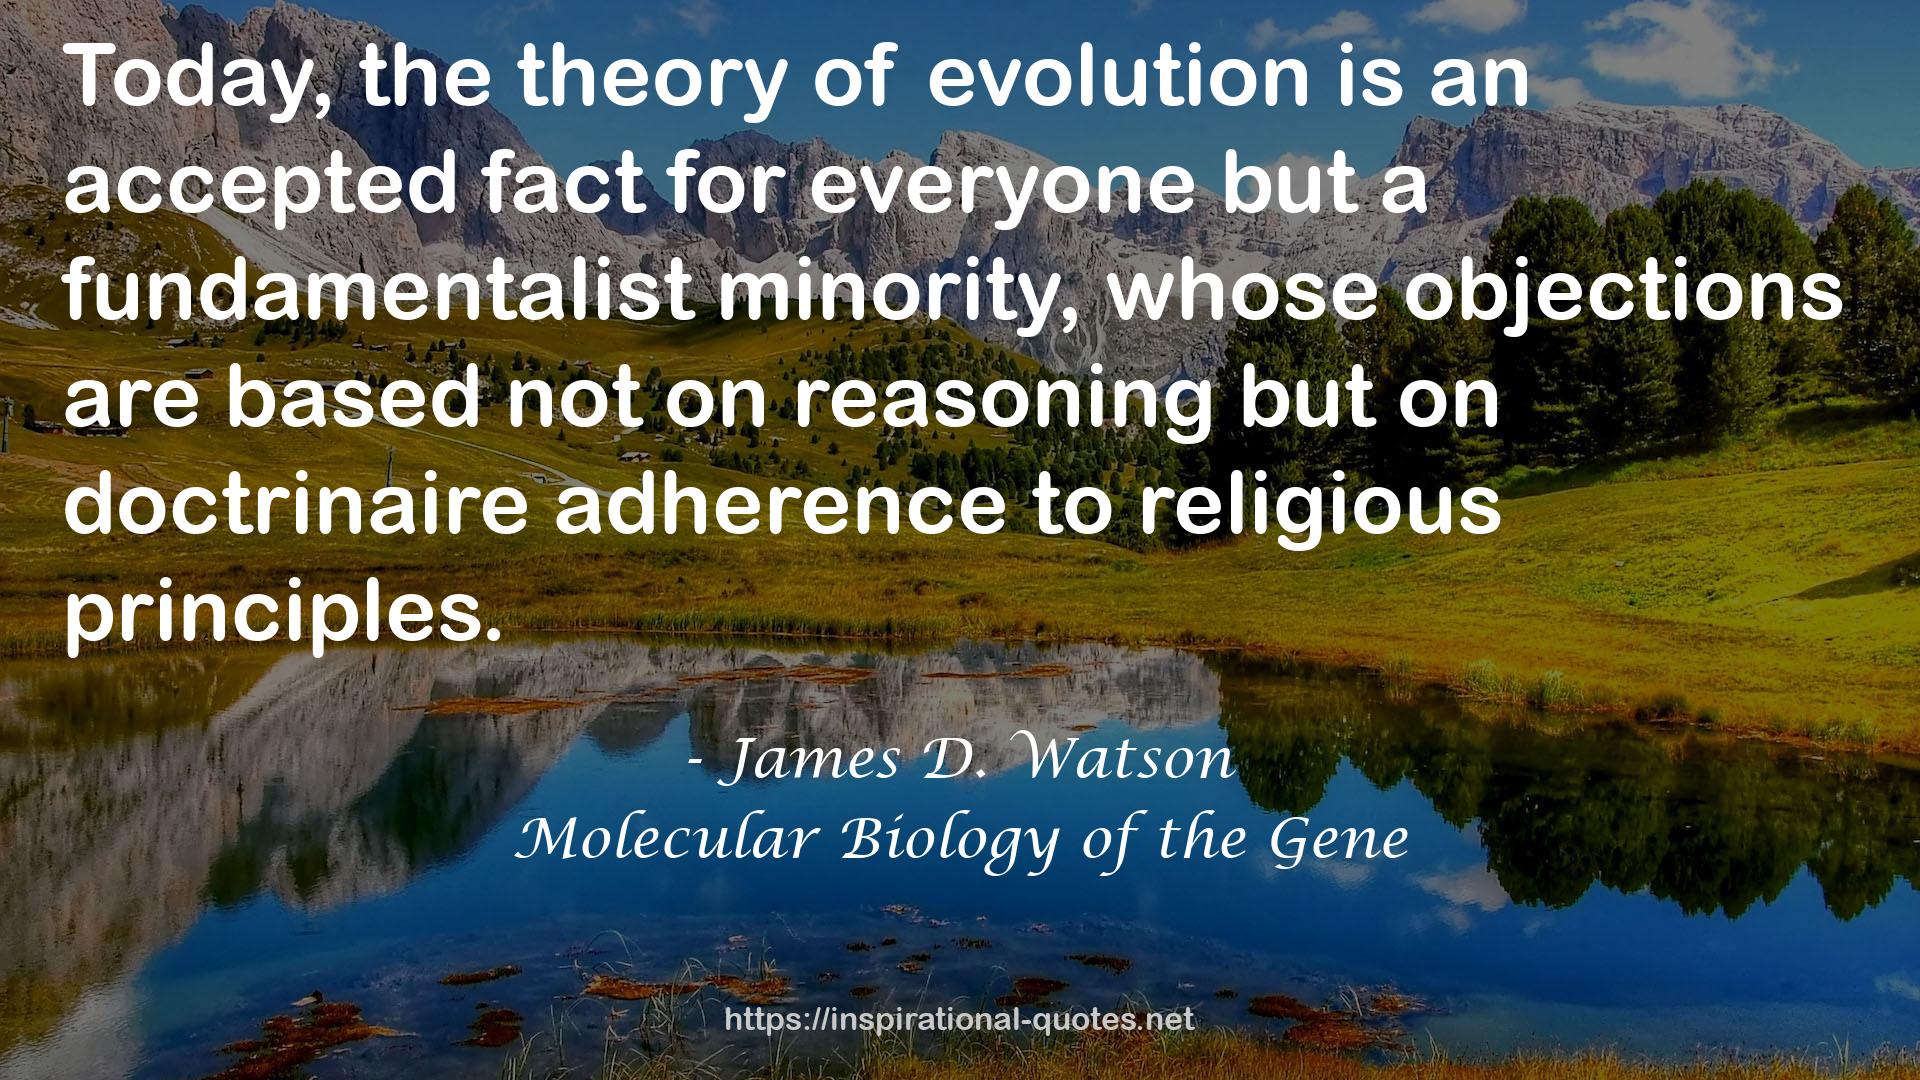 Molecular Biology of the Gene QUOTES